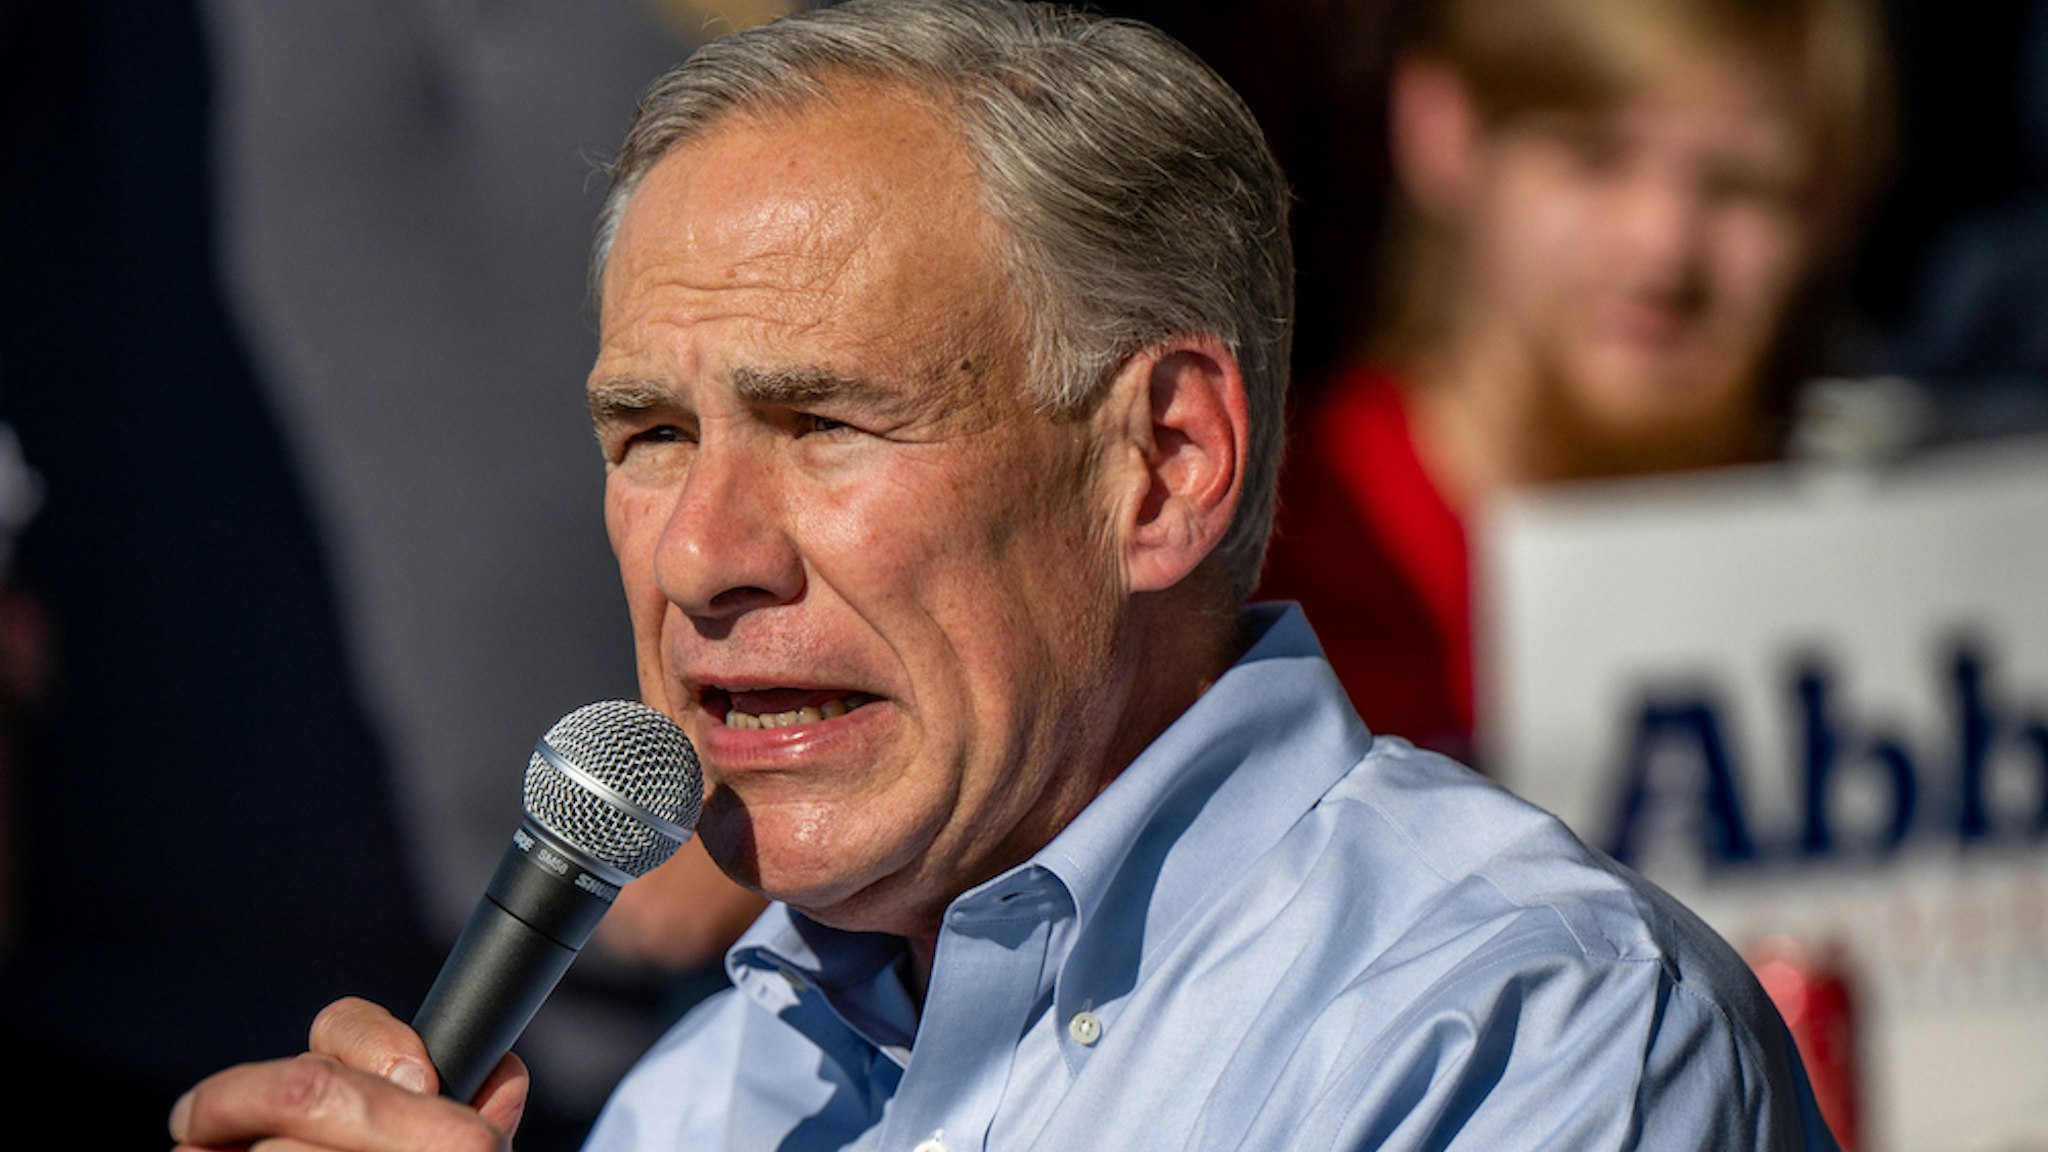 KATY, TEXAS - OCTOBER 27: Texas Gov. Greg Abbott speaks during a 'Get Out The Vote' rally at the Fuzzy's Pizza &amp; Italian Cafe on October 27, 2022 in Katy, Texas. With less than two weeks away from the midterm election, Gov. Greg Abbott continues campaigning across the state of Texas. Gov. Abbott is up against Democratic gubernatorial candidate Beto O'Rourke. (Photo by Brandon Bell/Getty Images)